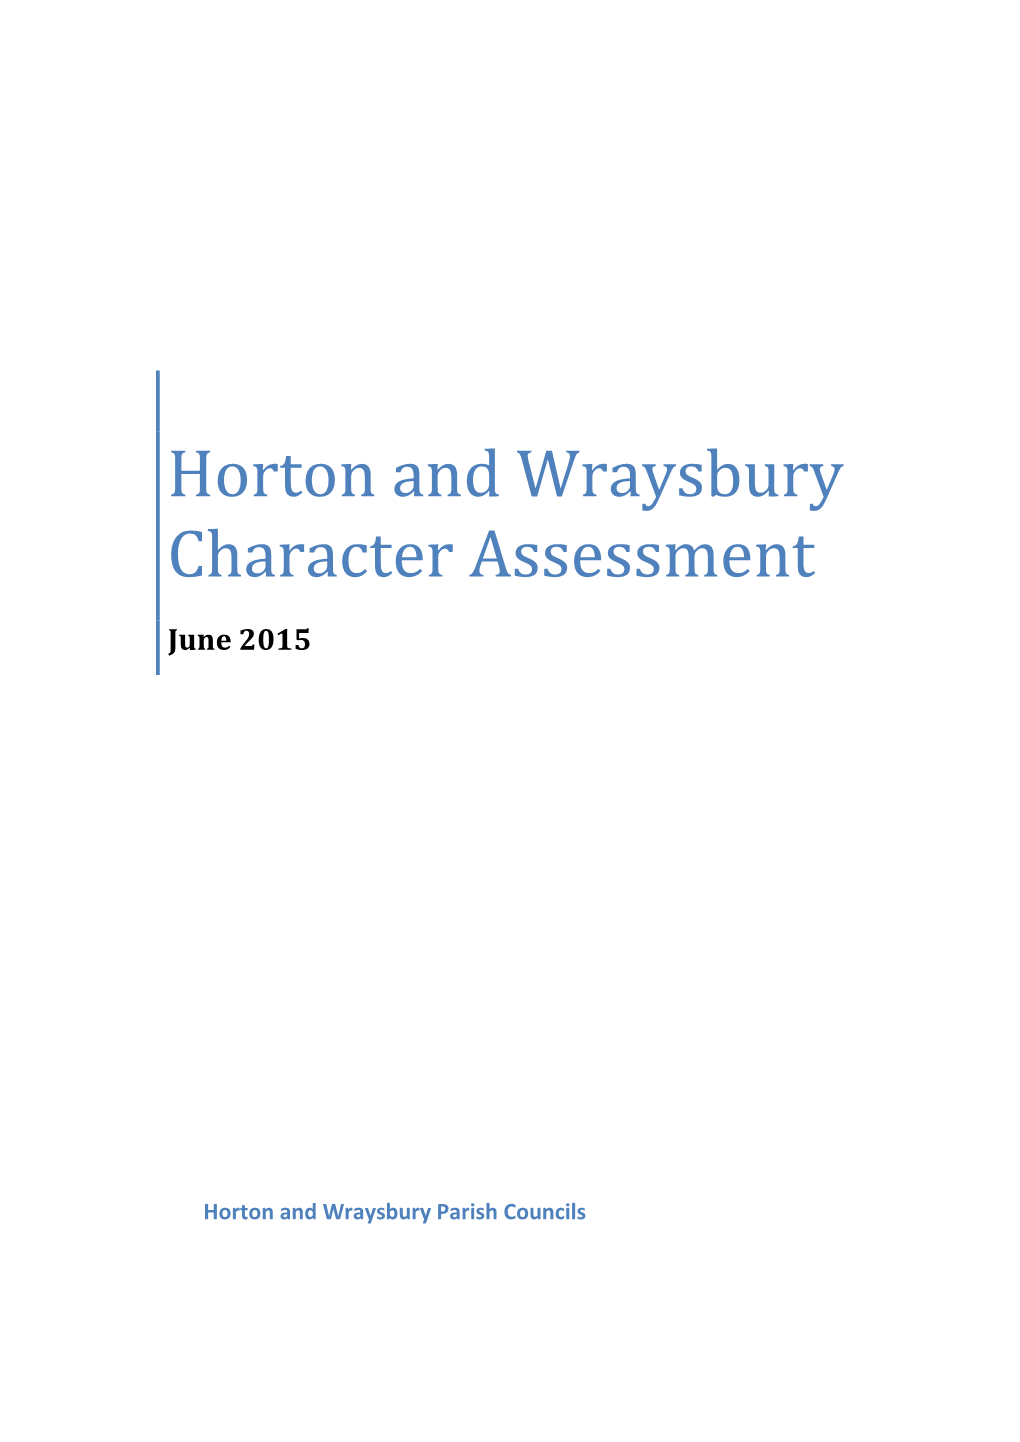 Horton and Wraysbury Character Assessment